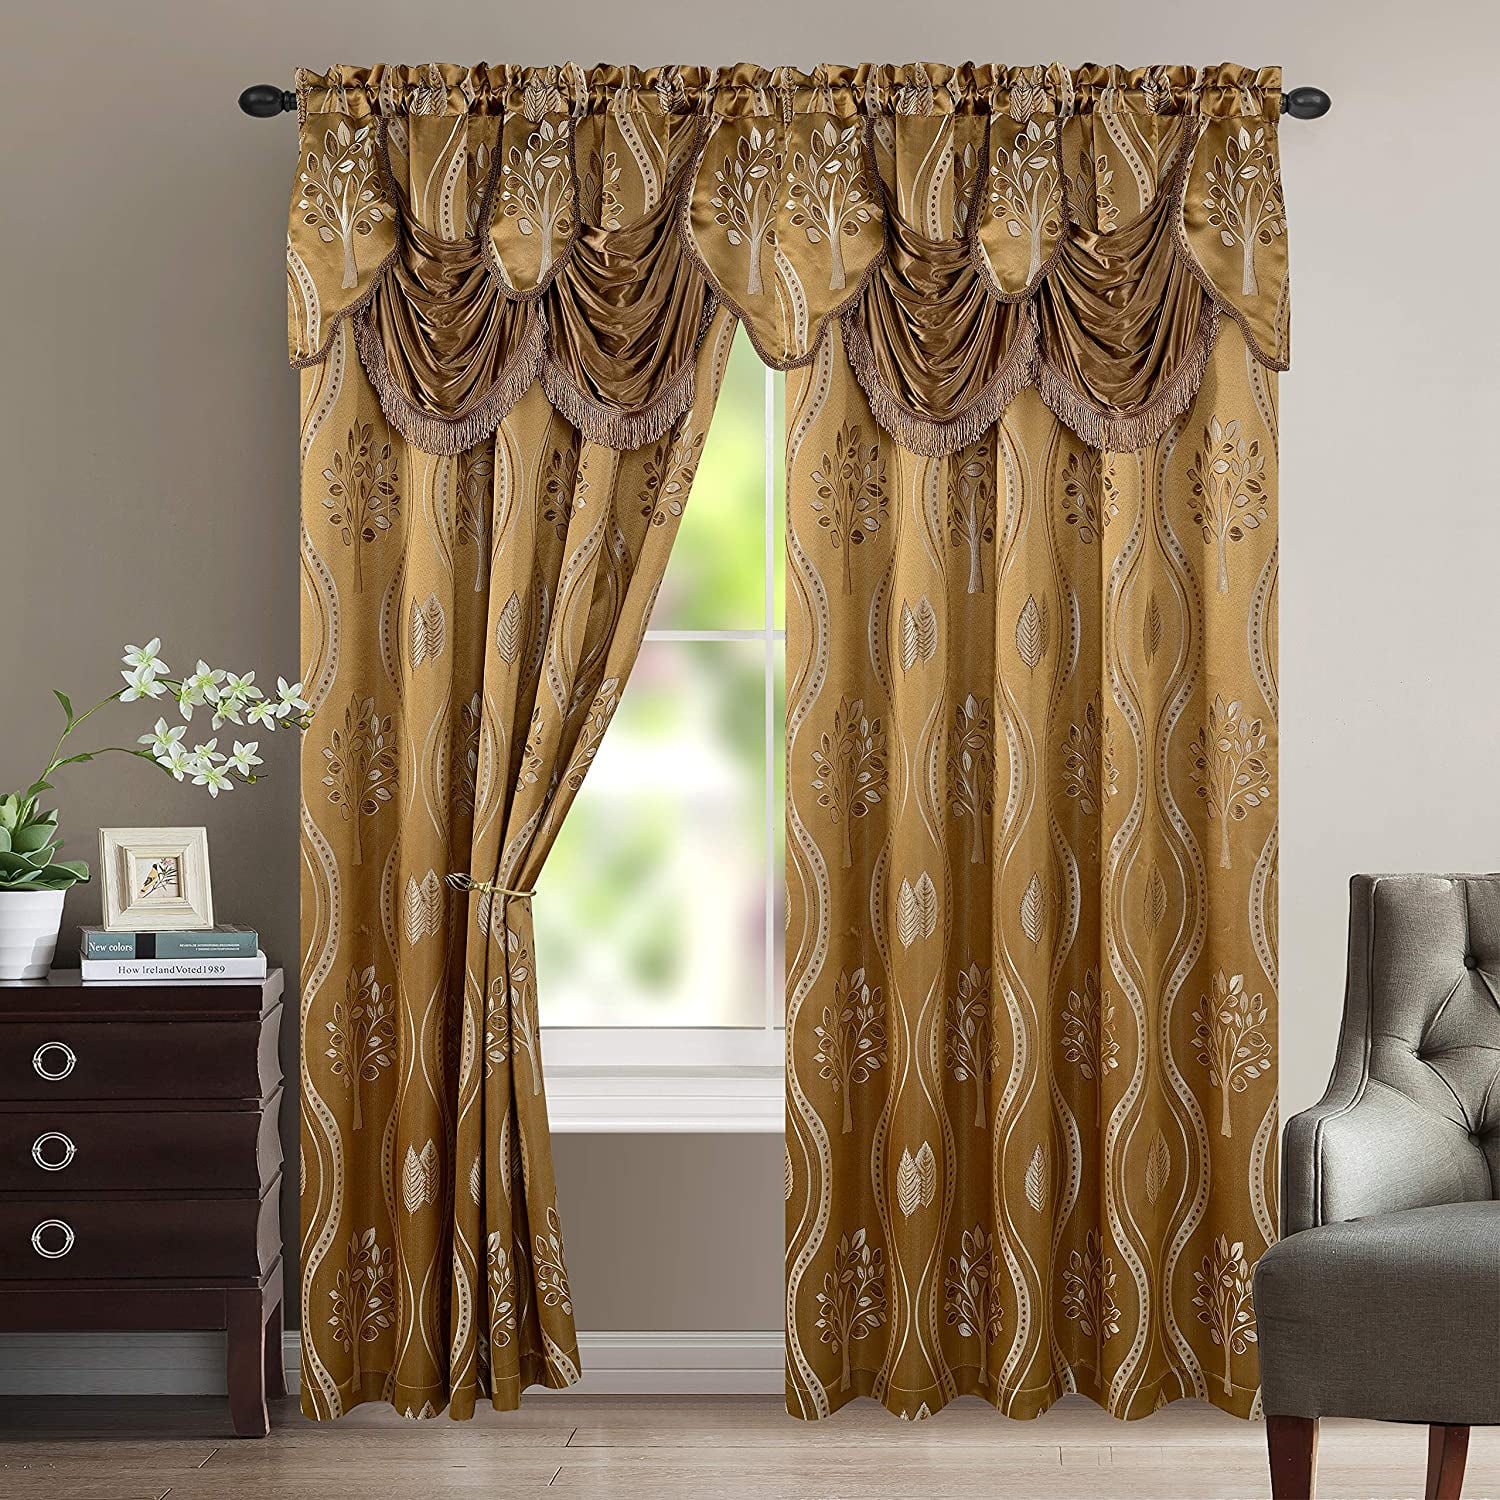 Penelopie Jacquard Look Curtain Panel Set 54 by 84 Inch set of 2 